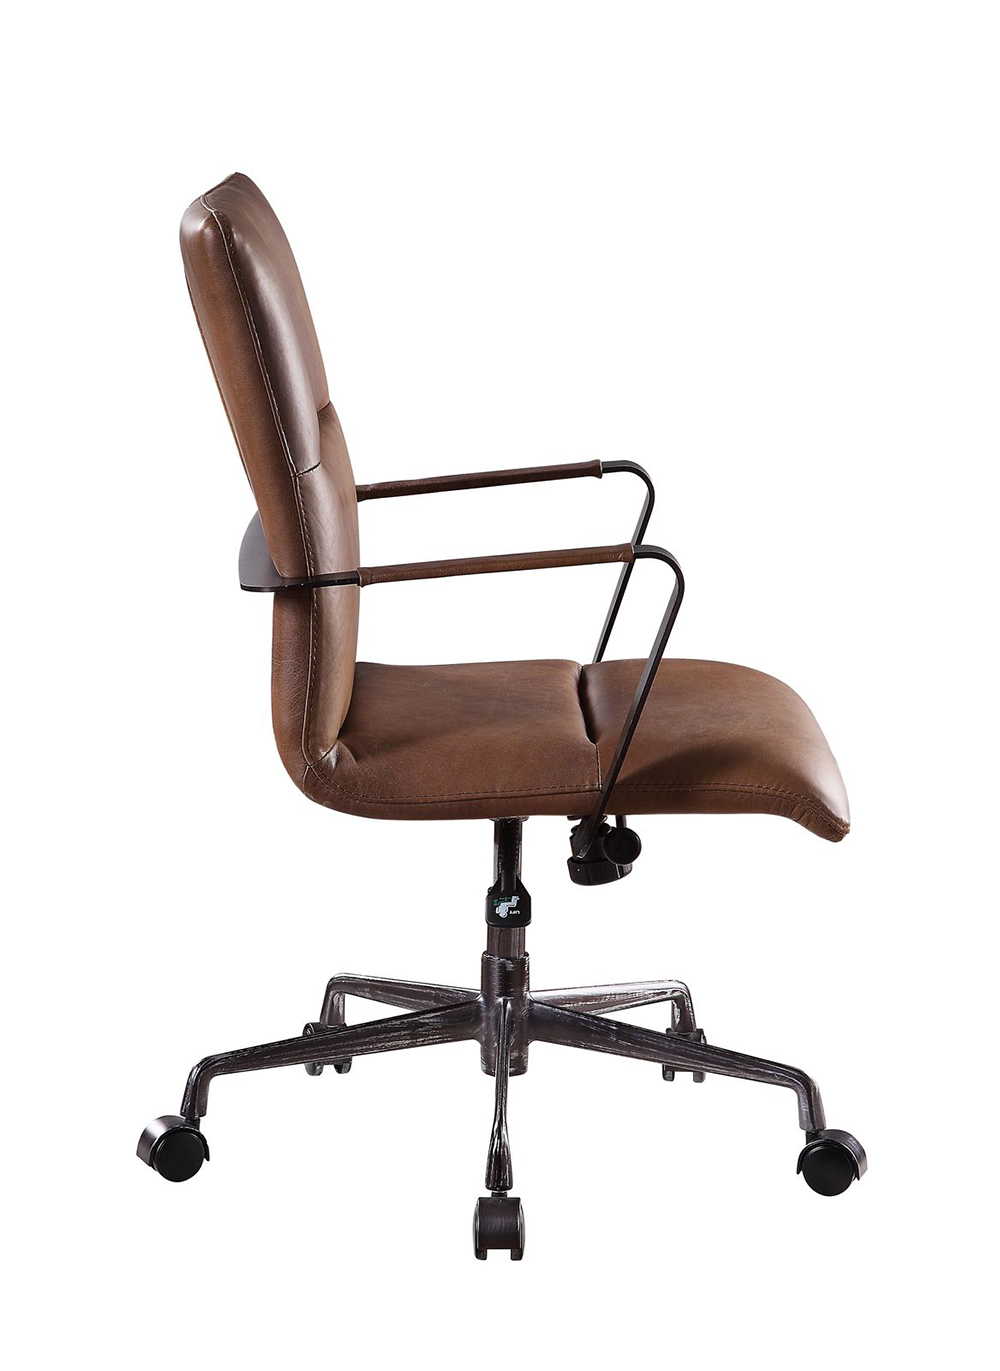 ACME Indra Leather Upholstered Swivel Office Chair, with High Backrest, and Metal Frame, for Restaurant, Cafe, Tavern, Office, Living Room - Brown